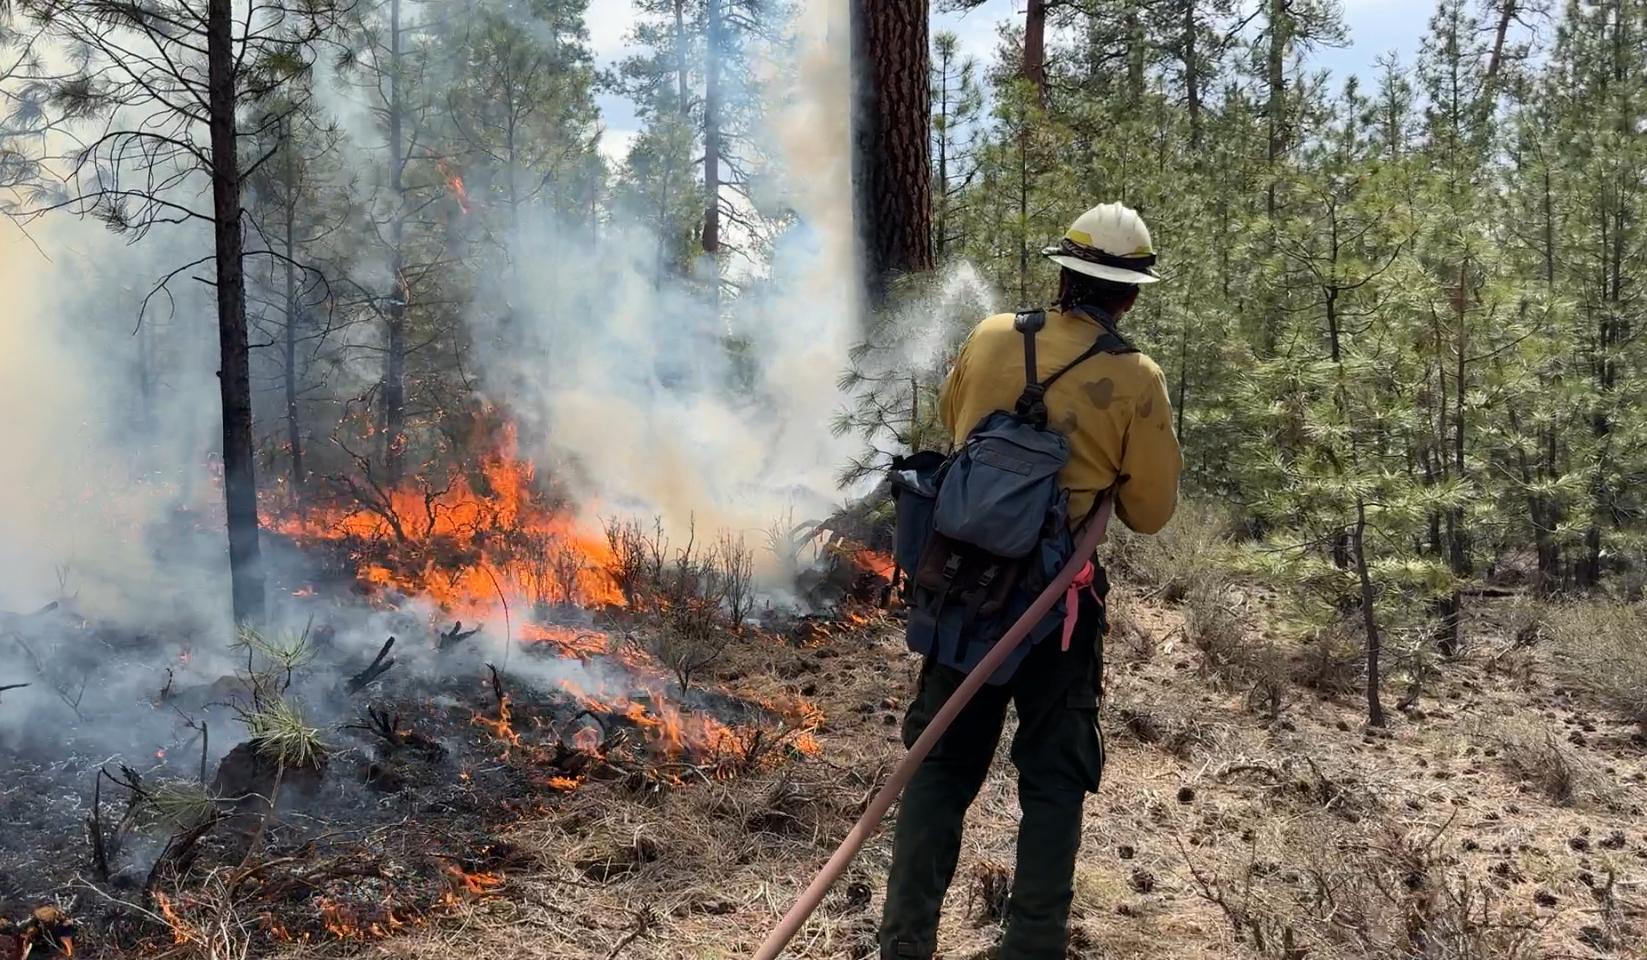 A firefighters sprays water out of hose at fire burning at the base of a pine